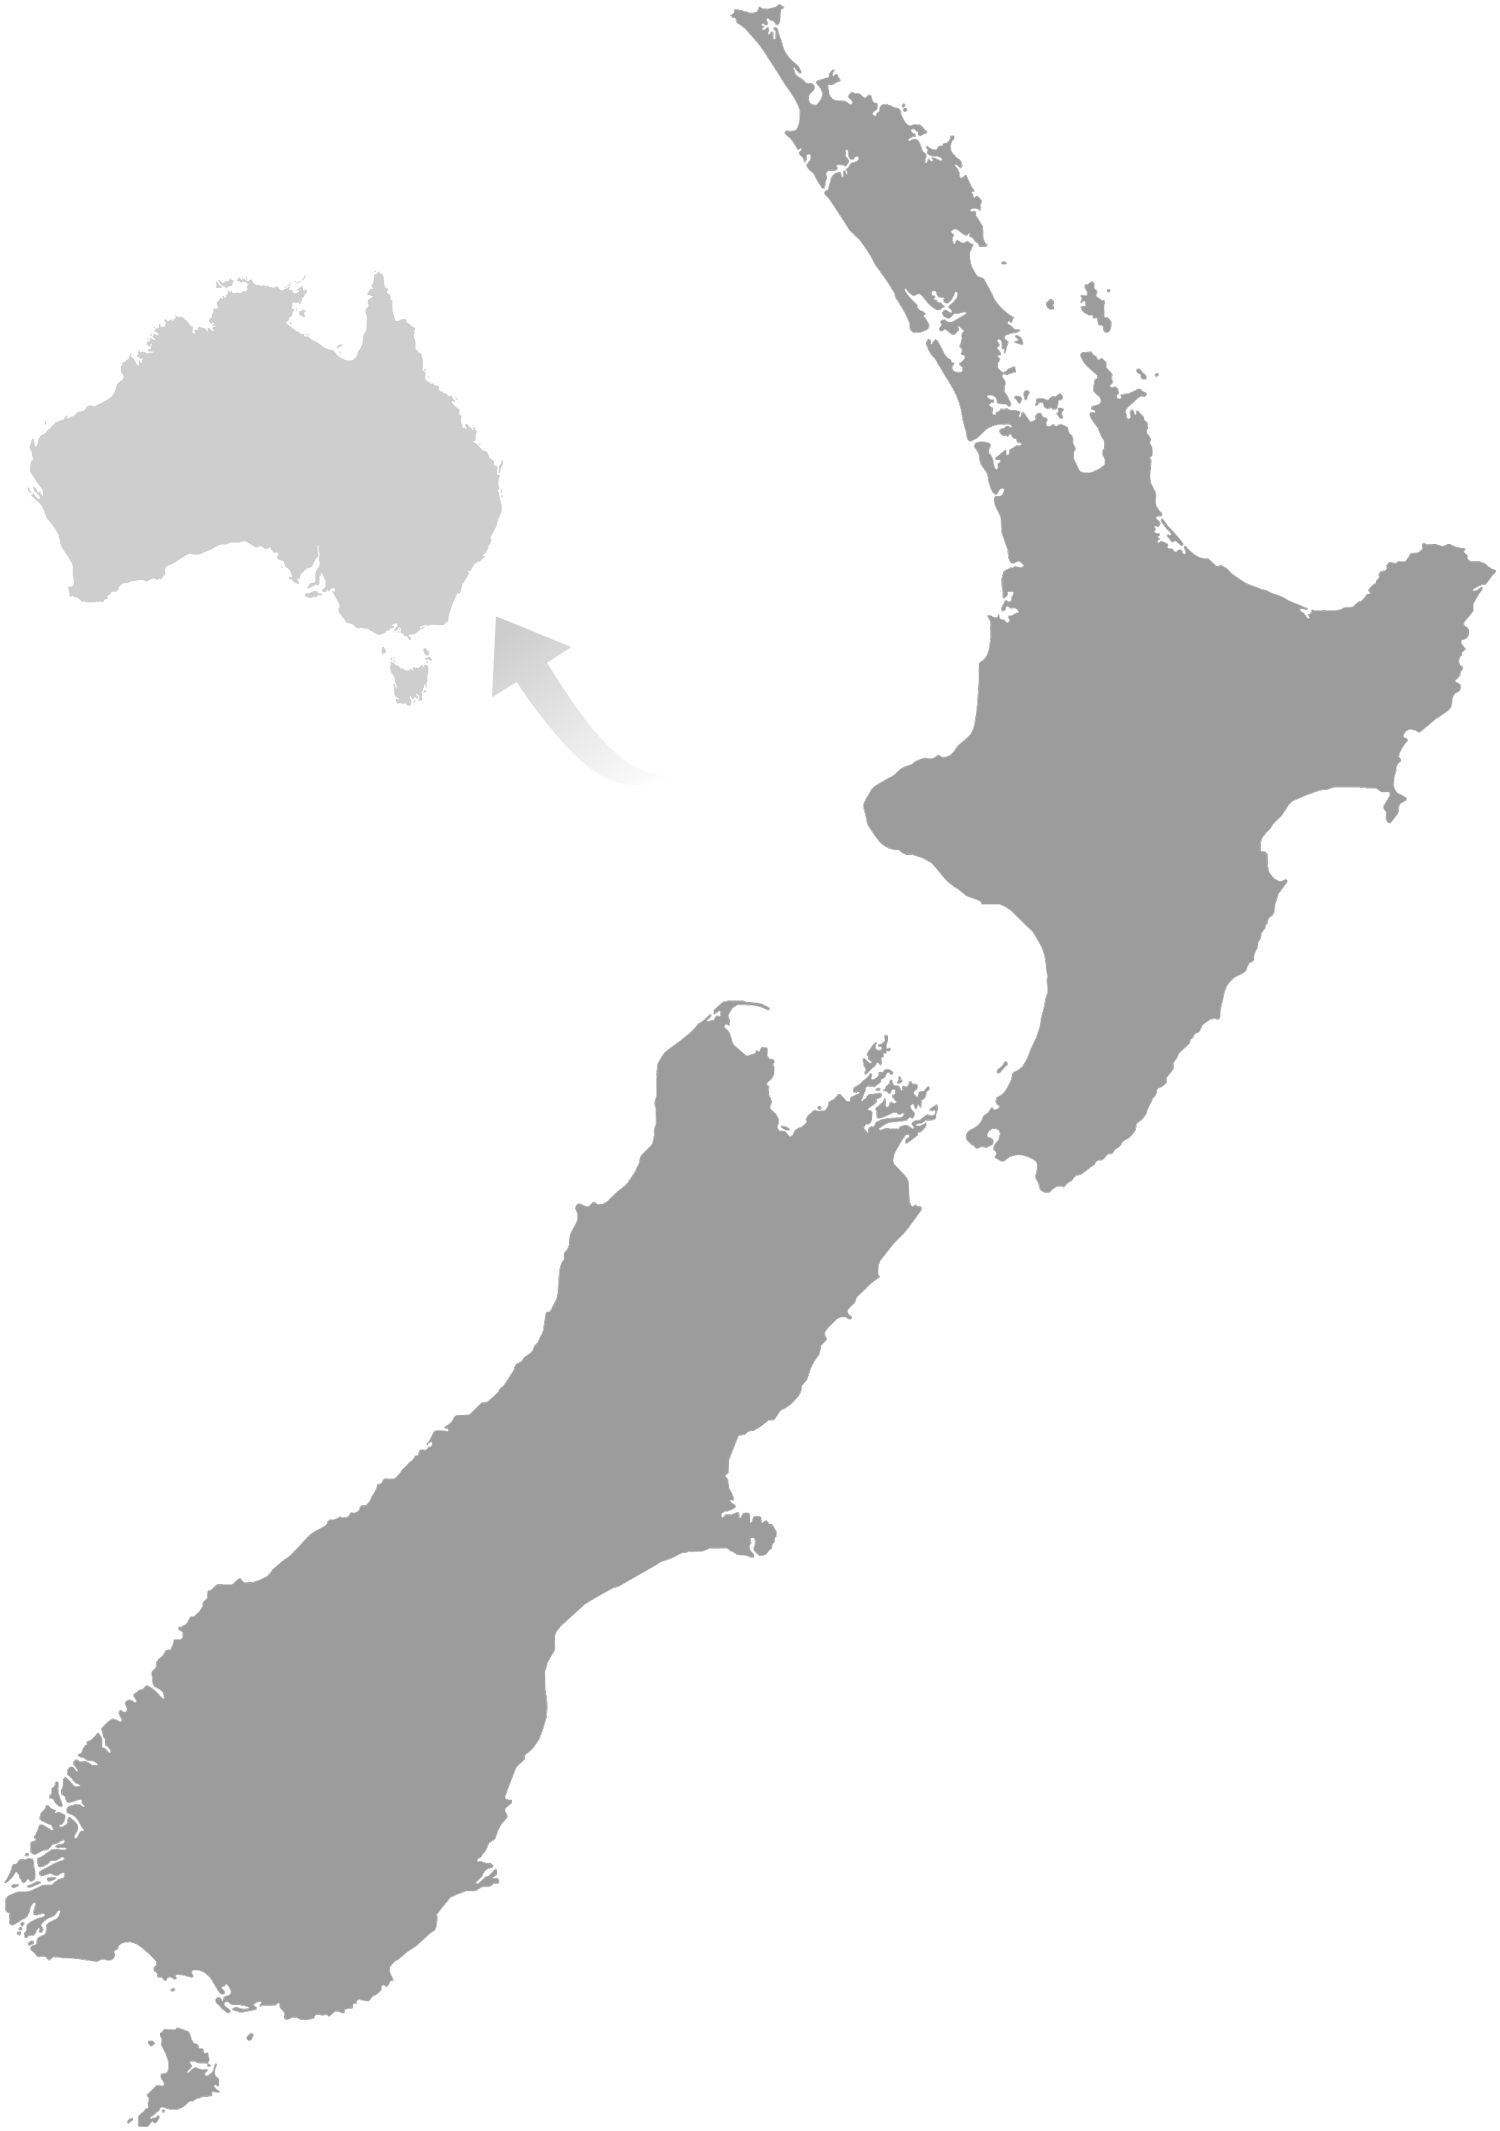 Map showing New Zealand (primarily) and Australia (inset, smaller)